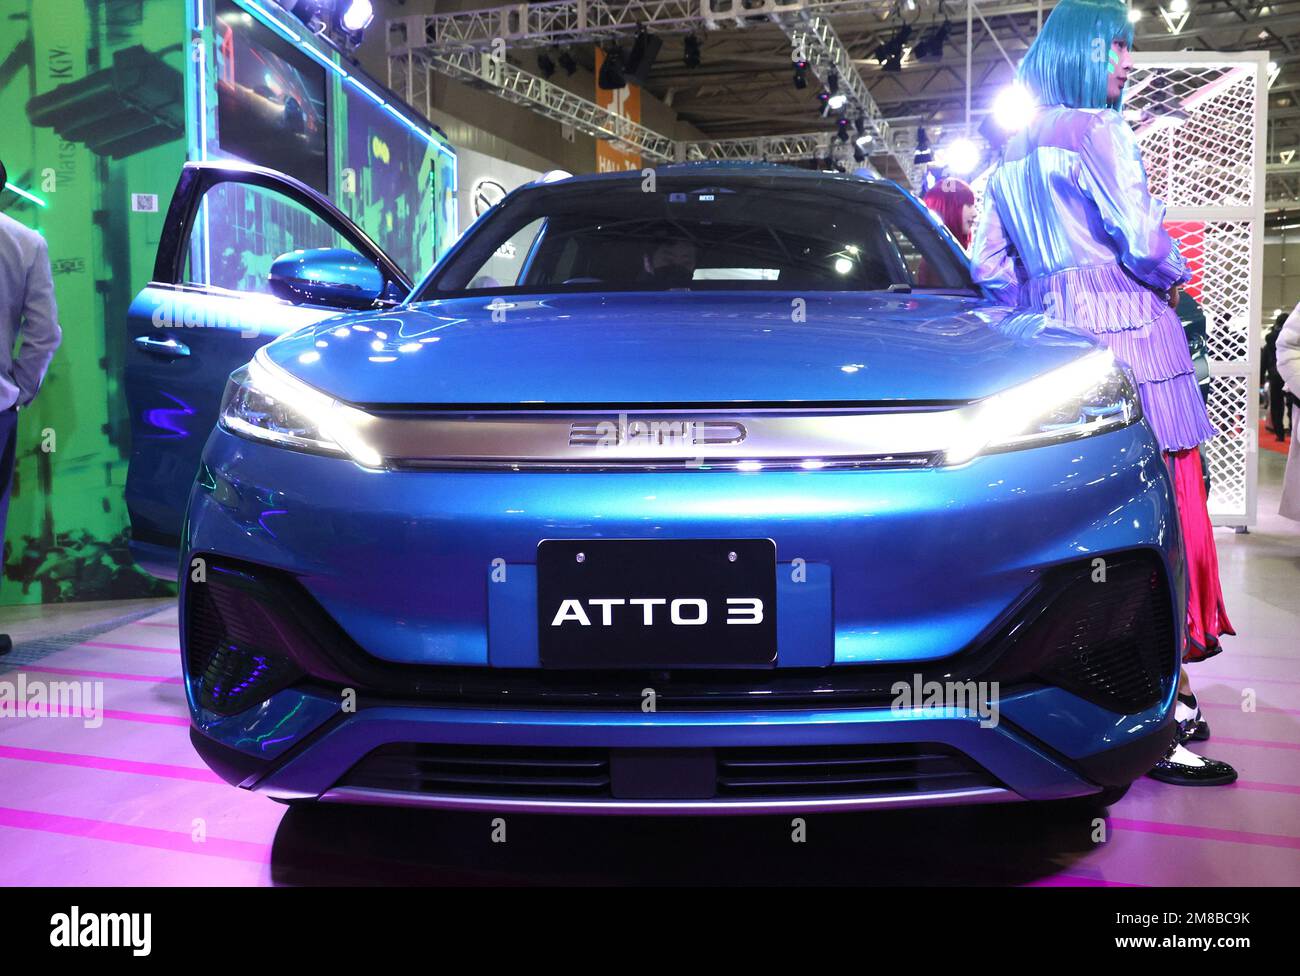 Chiba, Japan. 13th Jan, 2023. Chinese electric vehicle maker BYD displays an electric vehicle 'ATTO 3' which will go on sale at Japanese market from end of this month an annual custom car show 'Tokyo Auto Salon' in Chiba, suburban Tokyo on Friday, January 13, 2023. Credit: Yoshio Tsunoda/AFLO/Alamy Live News Stock Photo